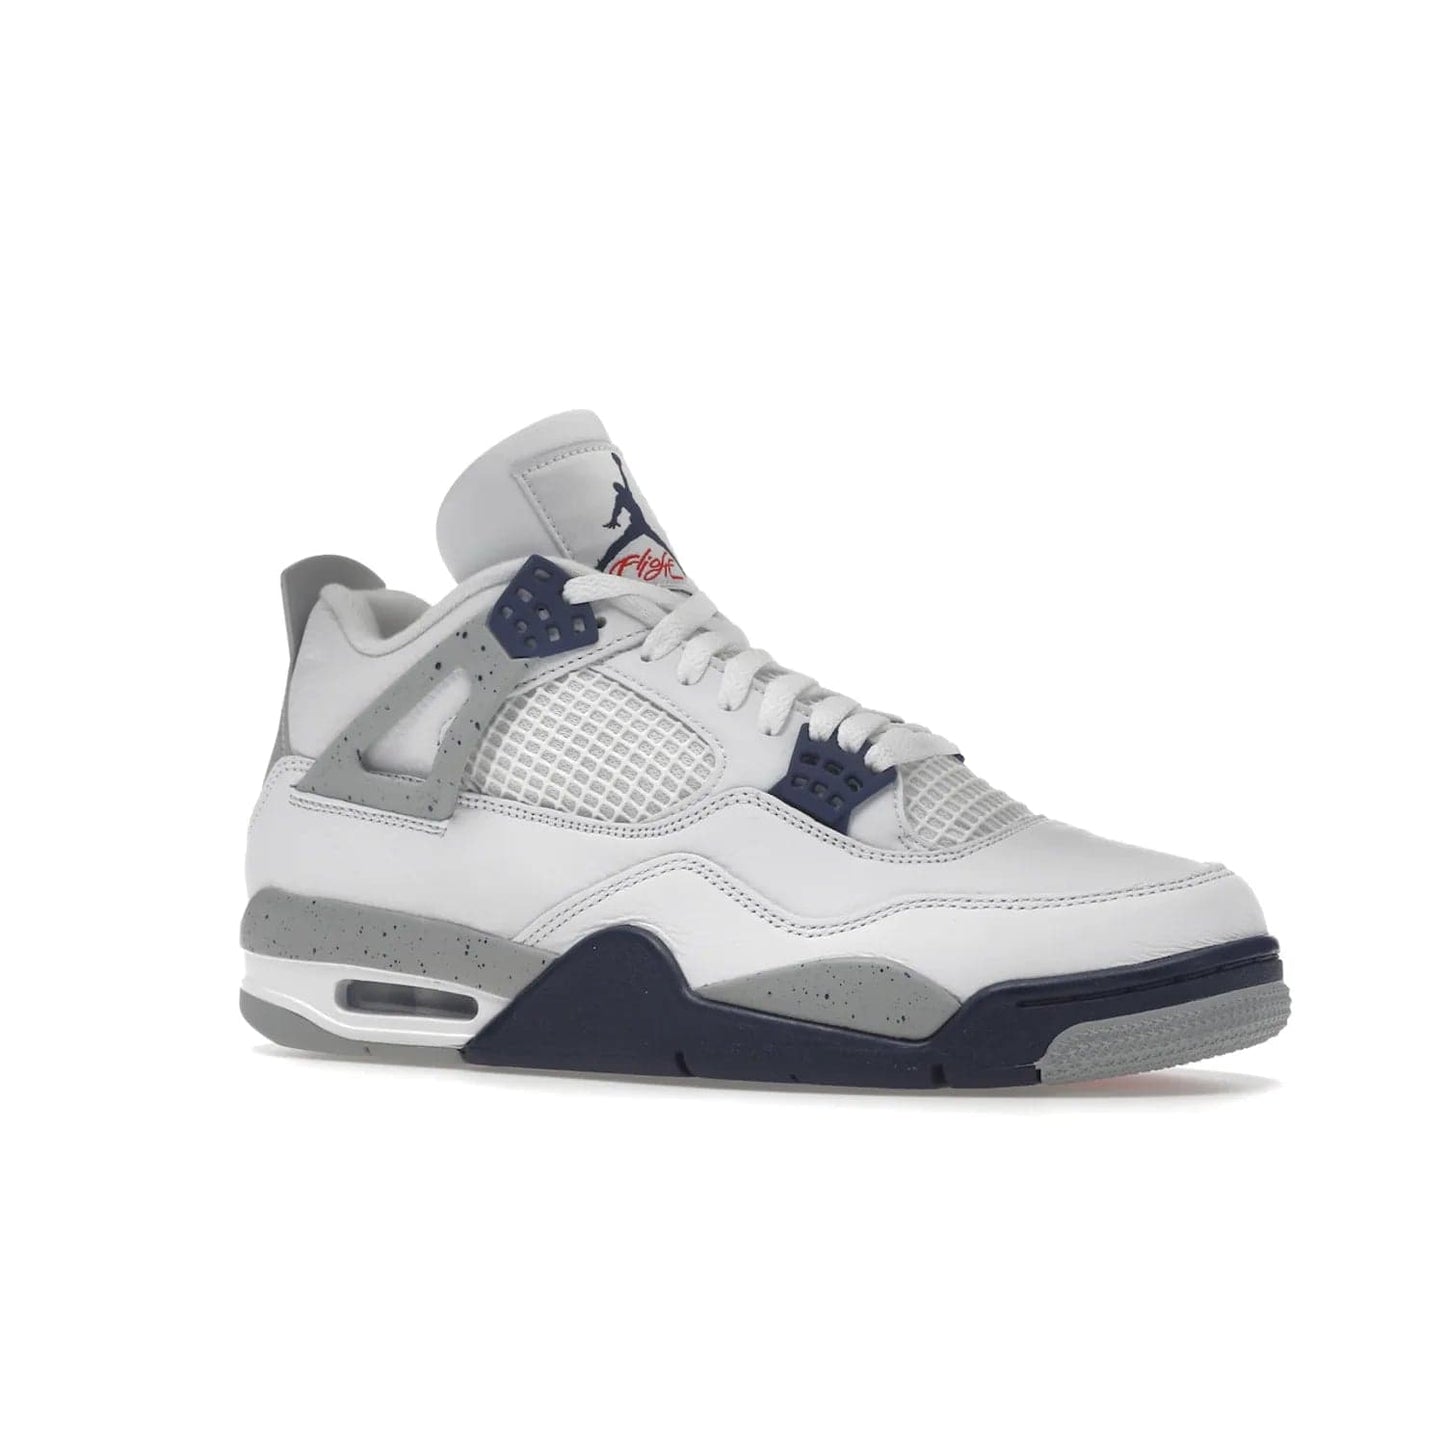 Jordan 4 Retro Midnight Navy - Image 4 - Only at www.BallersClubKickz.com - Shop the Air Jordan Retro 4 White Midnight Navy. Stand out with a classic white leather upper, black support wings, midnight navy eyelets, and Crimson Jumpman tongue tag. Unbeatable comfort with two-tone polyurethane midsole with encapsulated Air technology. Get yours before October 29th, 2022.